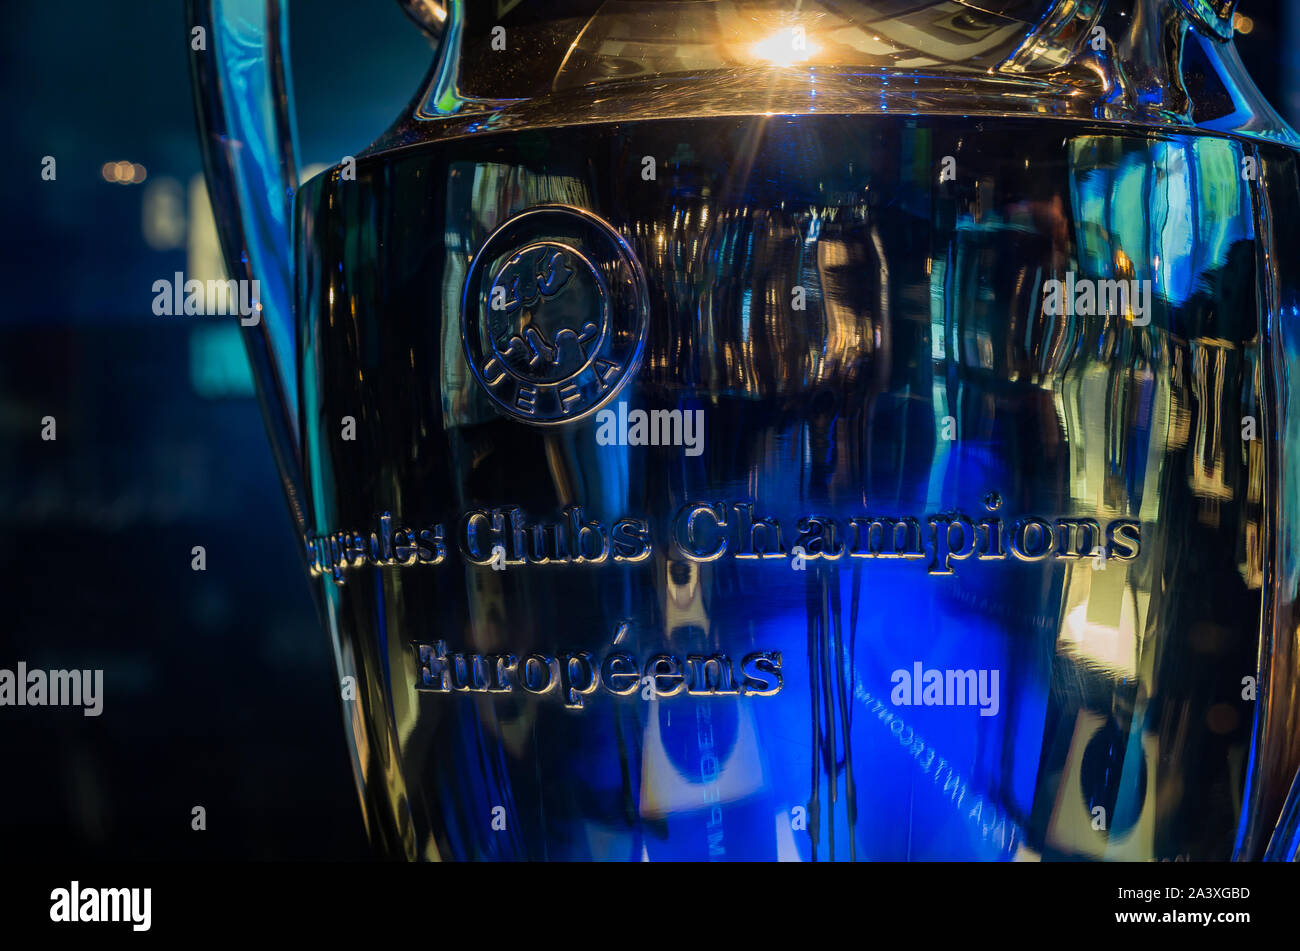 A close-up picture of the Champions League trophy on display inside the FC Porto Museum. Stock Photo